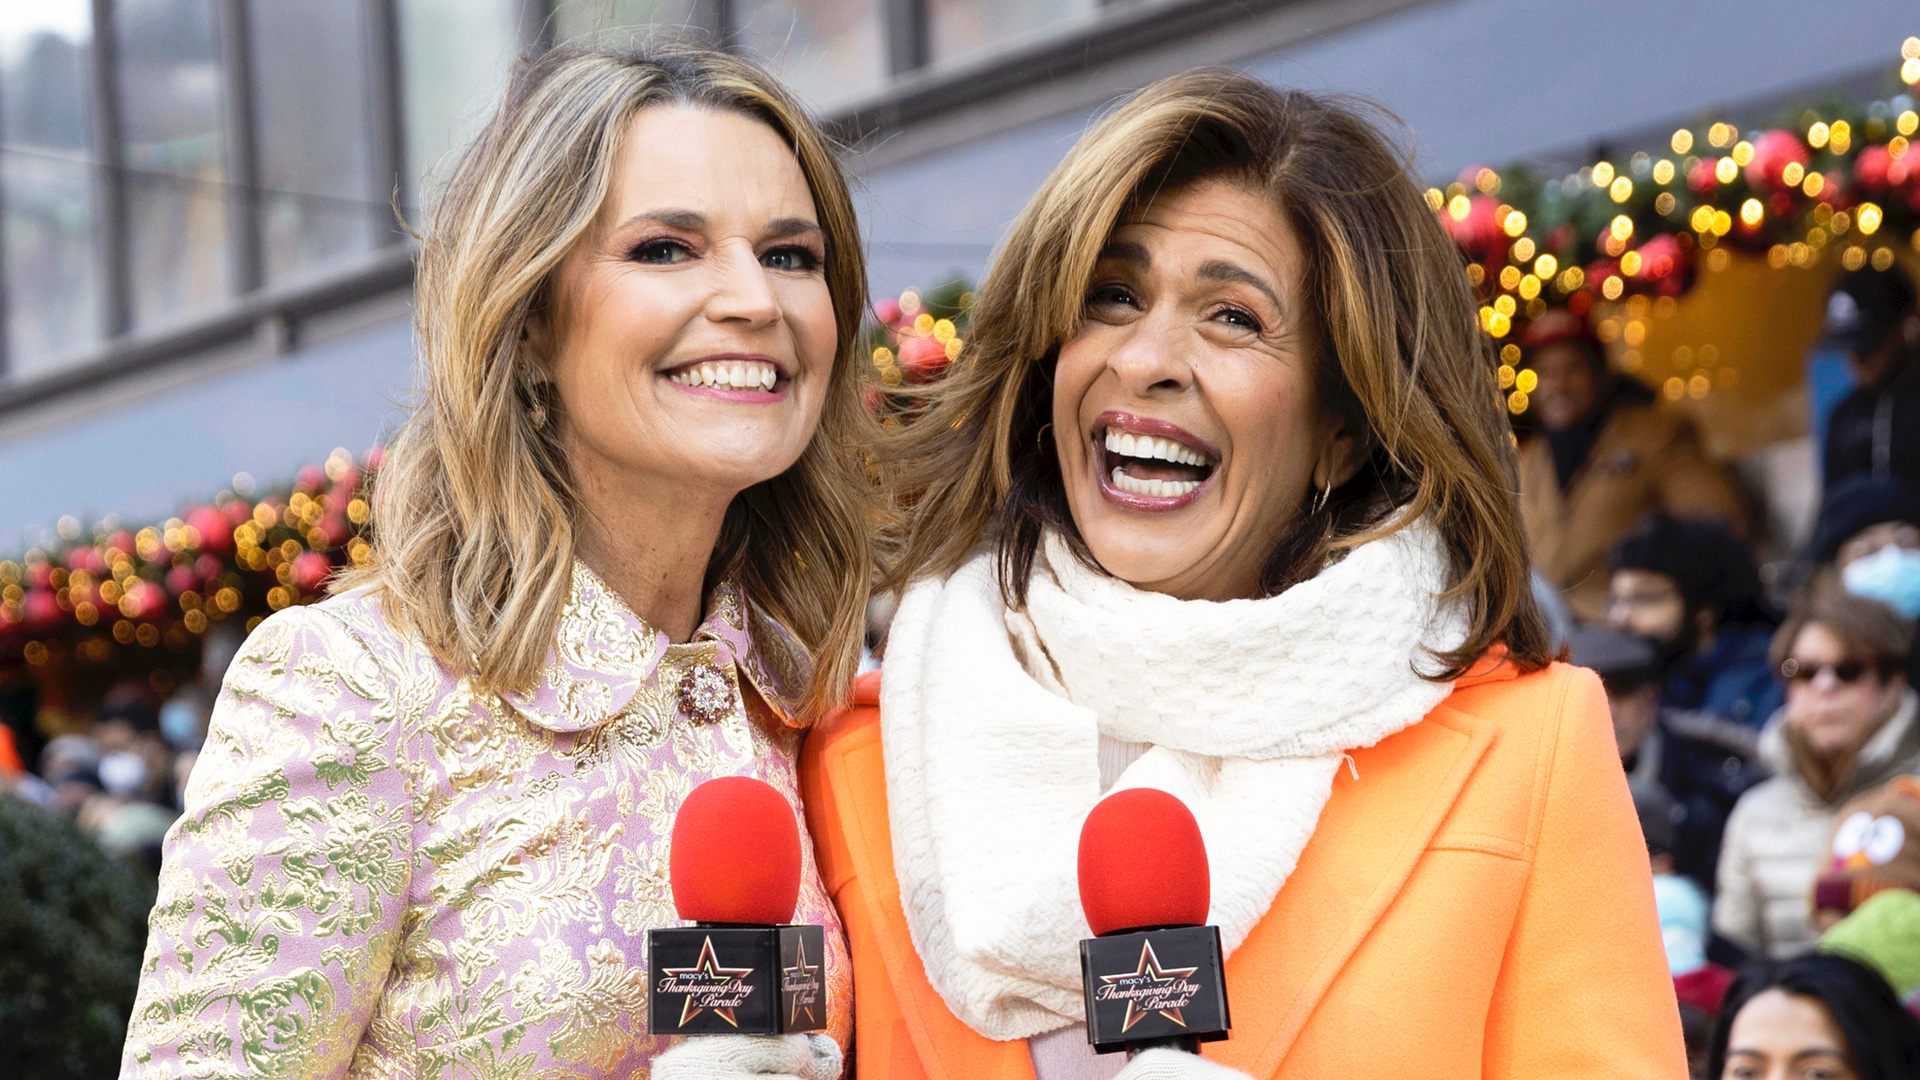 Inside Today stars Hoda Kotb and Savannah Guthrie’s nasty ‘feud’Dropping co-hosts ‘signs’Behind the smiles